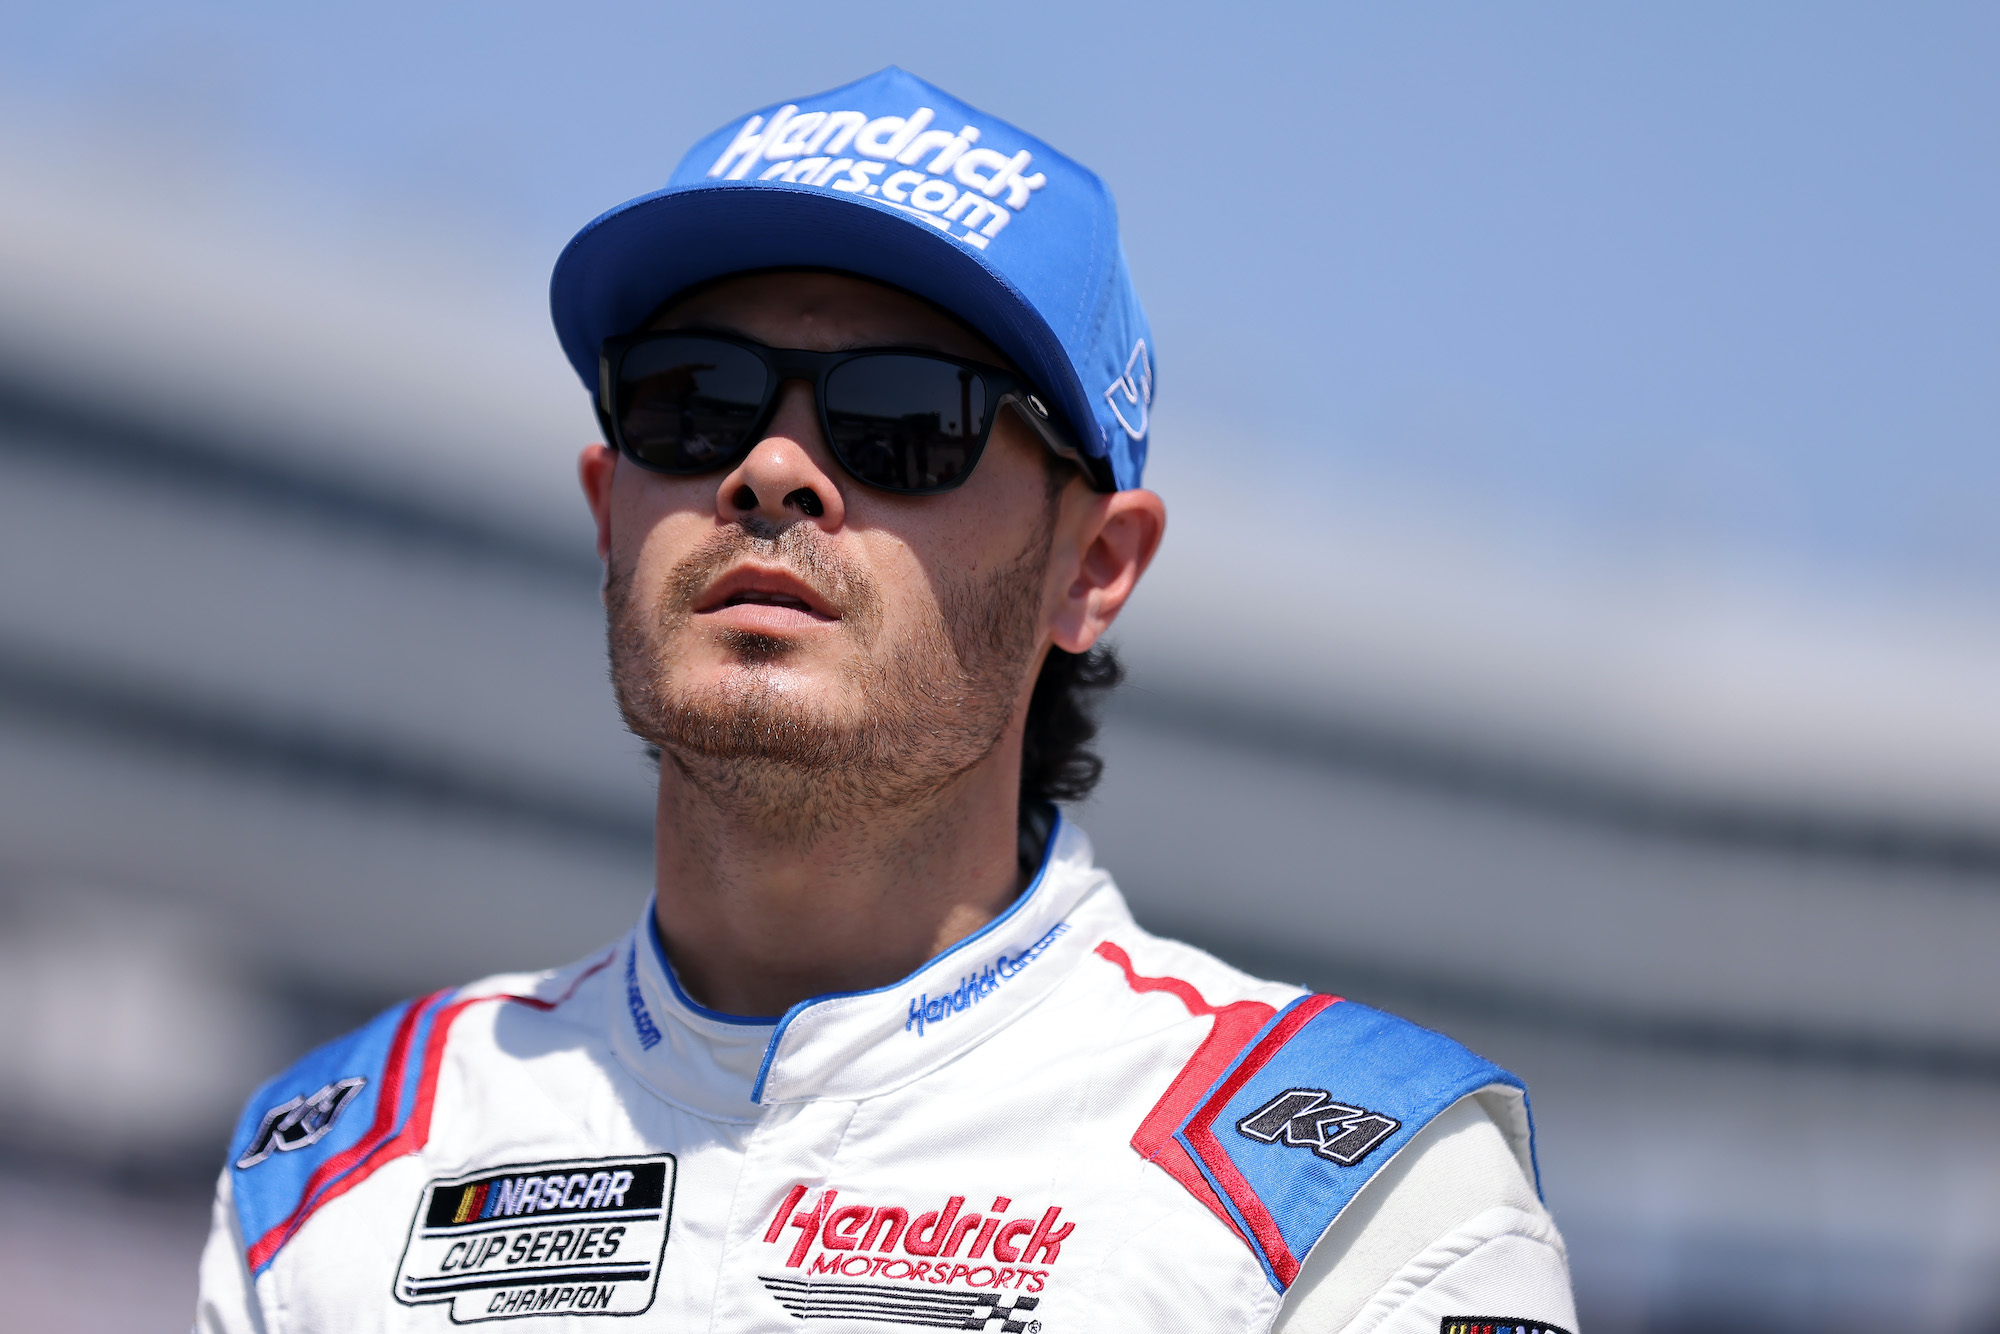 Kyle Larson Offers Harsh Criticism of NASCAR and Joins Chase Elliott in Calling Out Sanctioning Body for Taking Step Backward in Safety With Next Gen Car